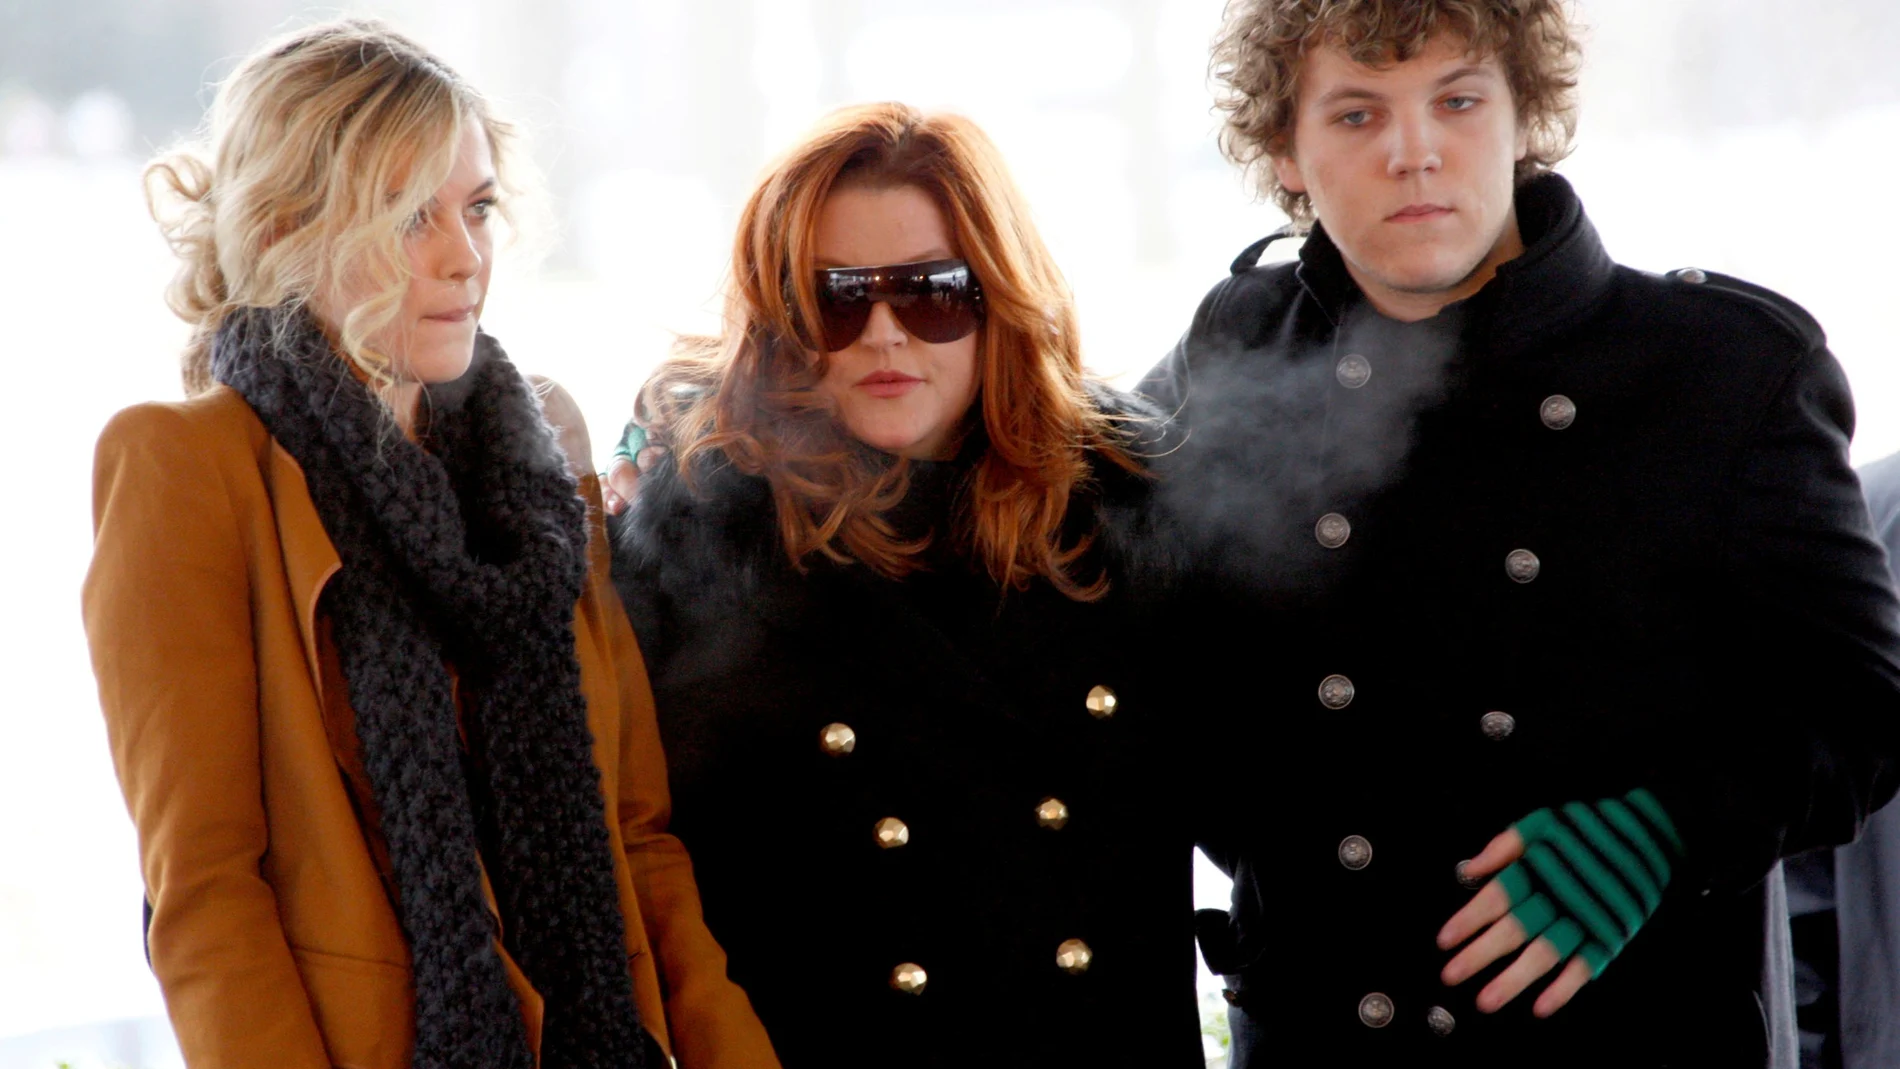 FILE PHOTO: Lisa Marie Presley, with her children Riley and Benjamin Keough, attend the 75th birthday celebration for Elvis Presley in Memphis